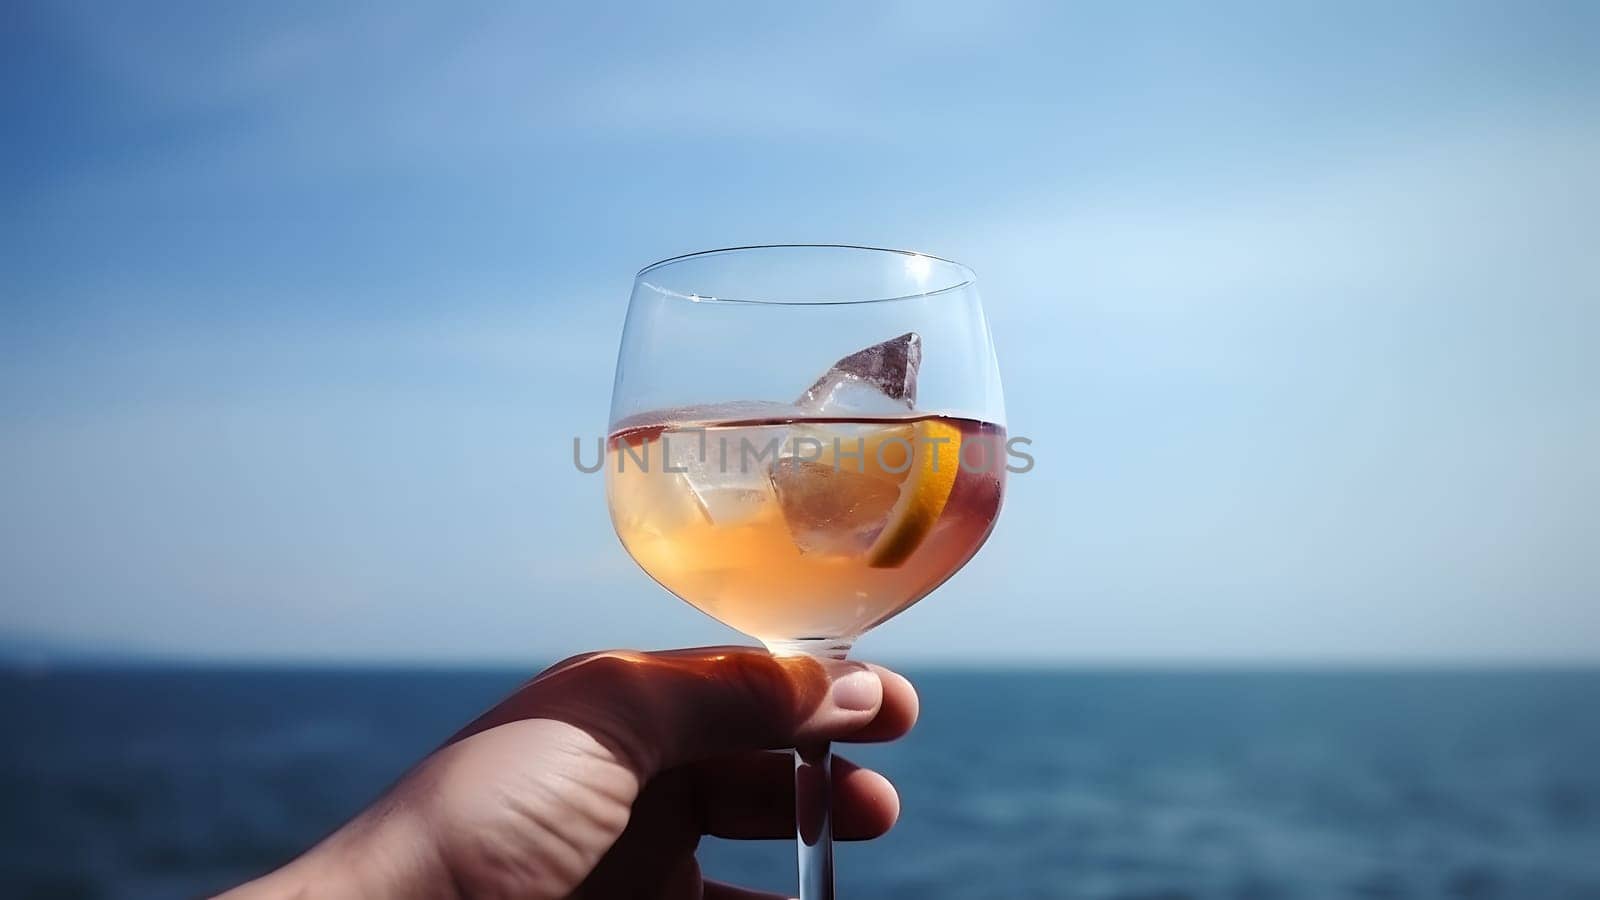 caucasian hand holding glass of red fruit cocktail on blurry sea horizon background at sunny day. Neural network generated in May 2023. Not based on any actual person, scene or pattern.